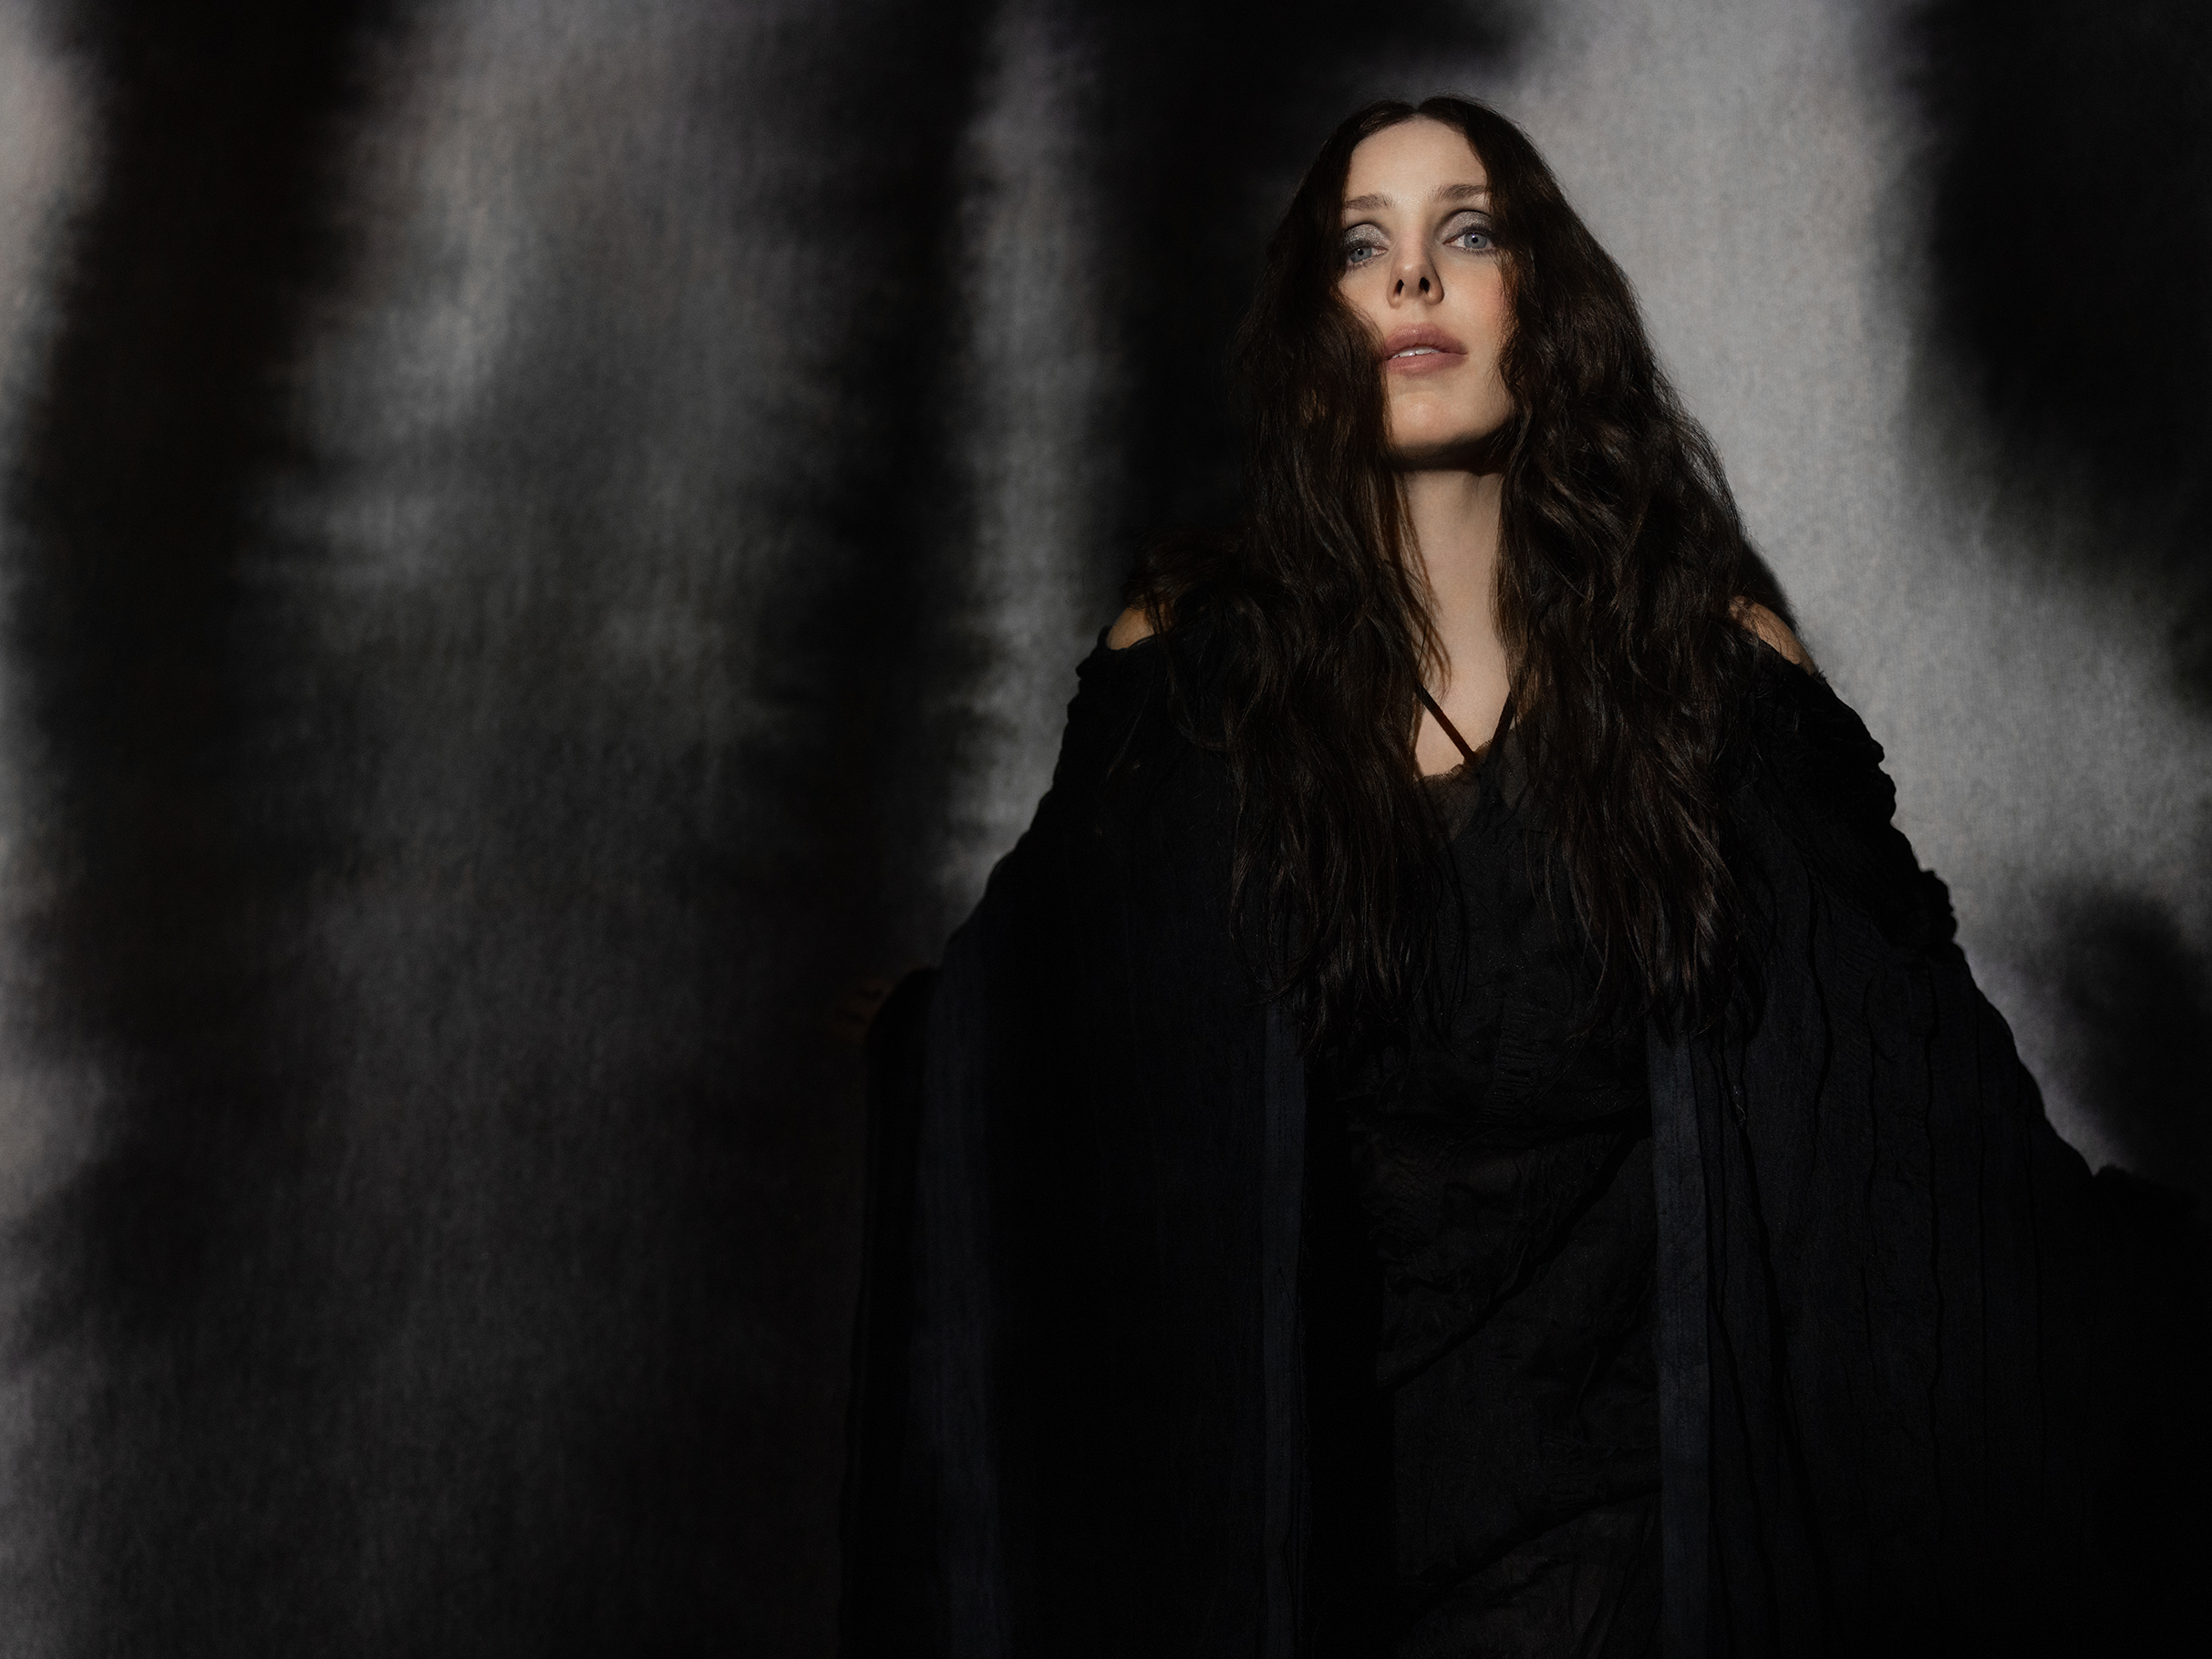 Image used with permission from Ticketmaster | Chelsea Wolfe tickets